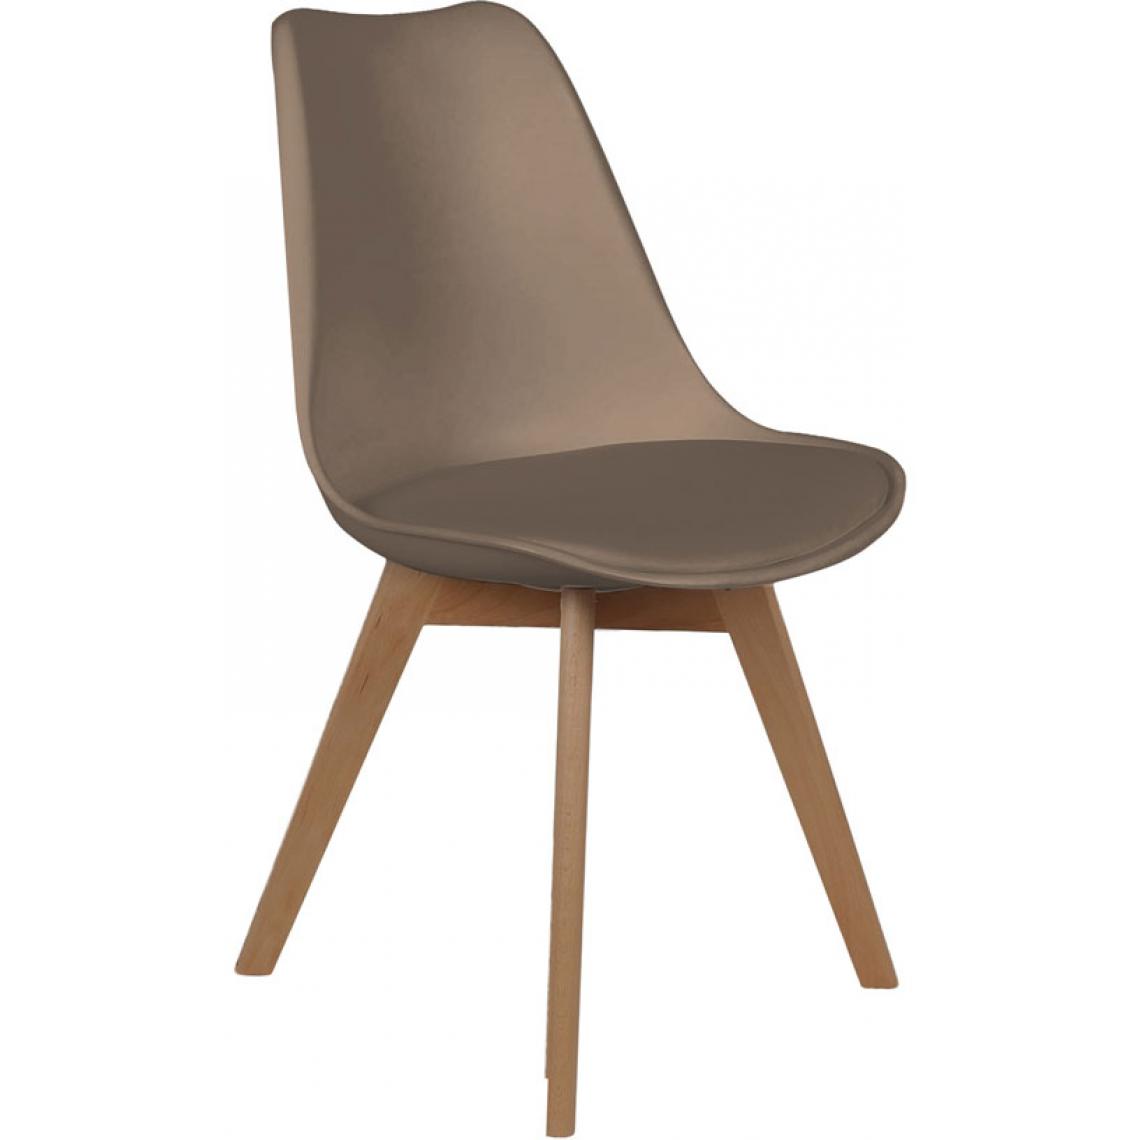 3S. x Home - Chaise Scandinave Coque Taupe avec Assise Rembourrée FJORD - Chaises